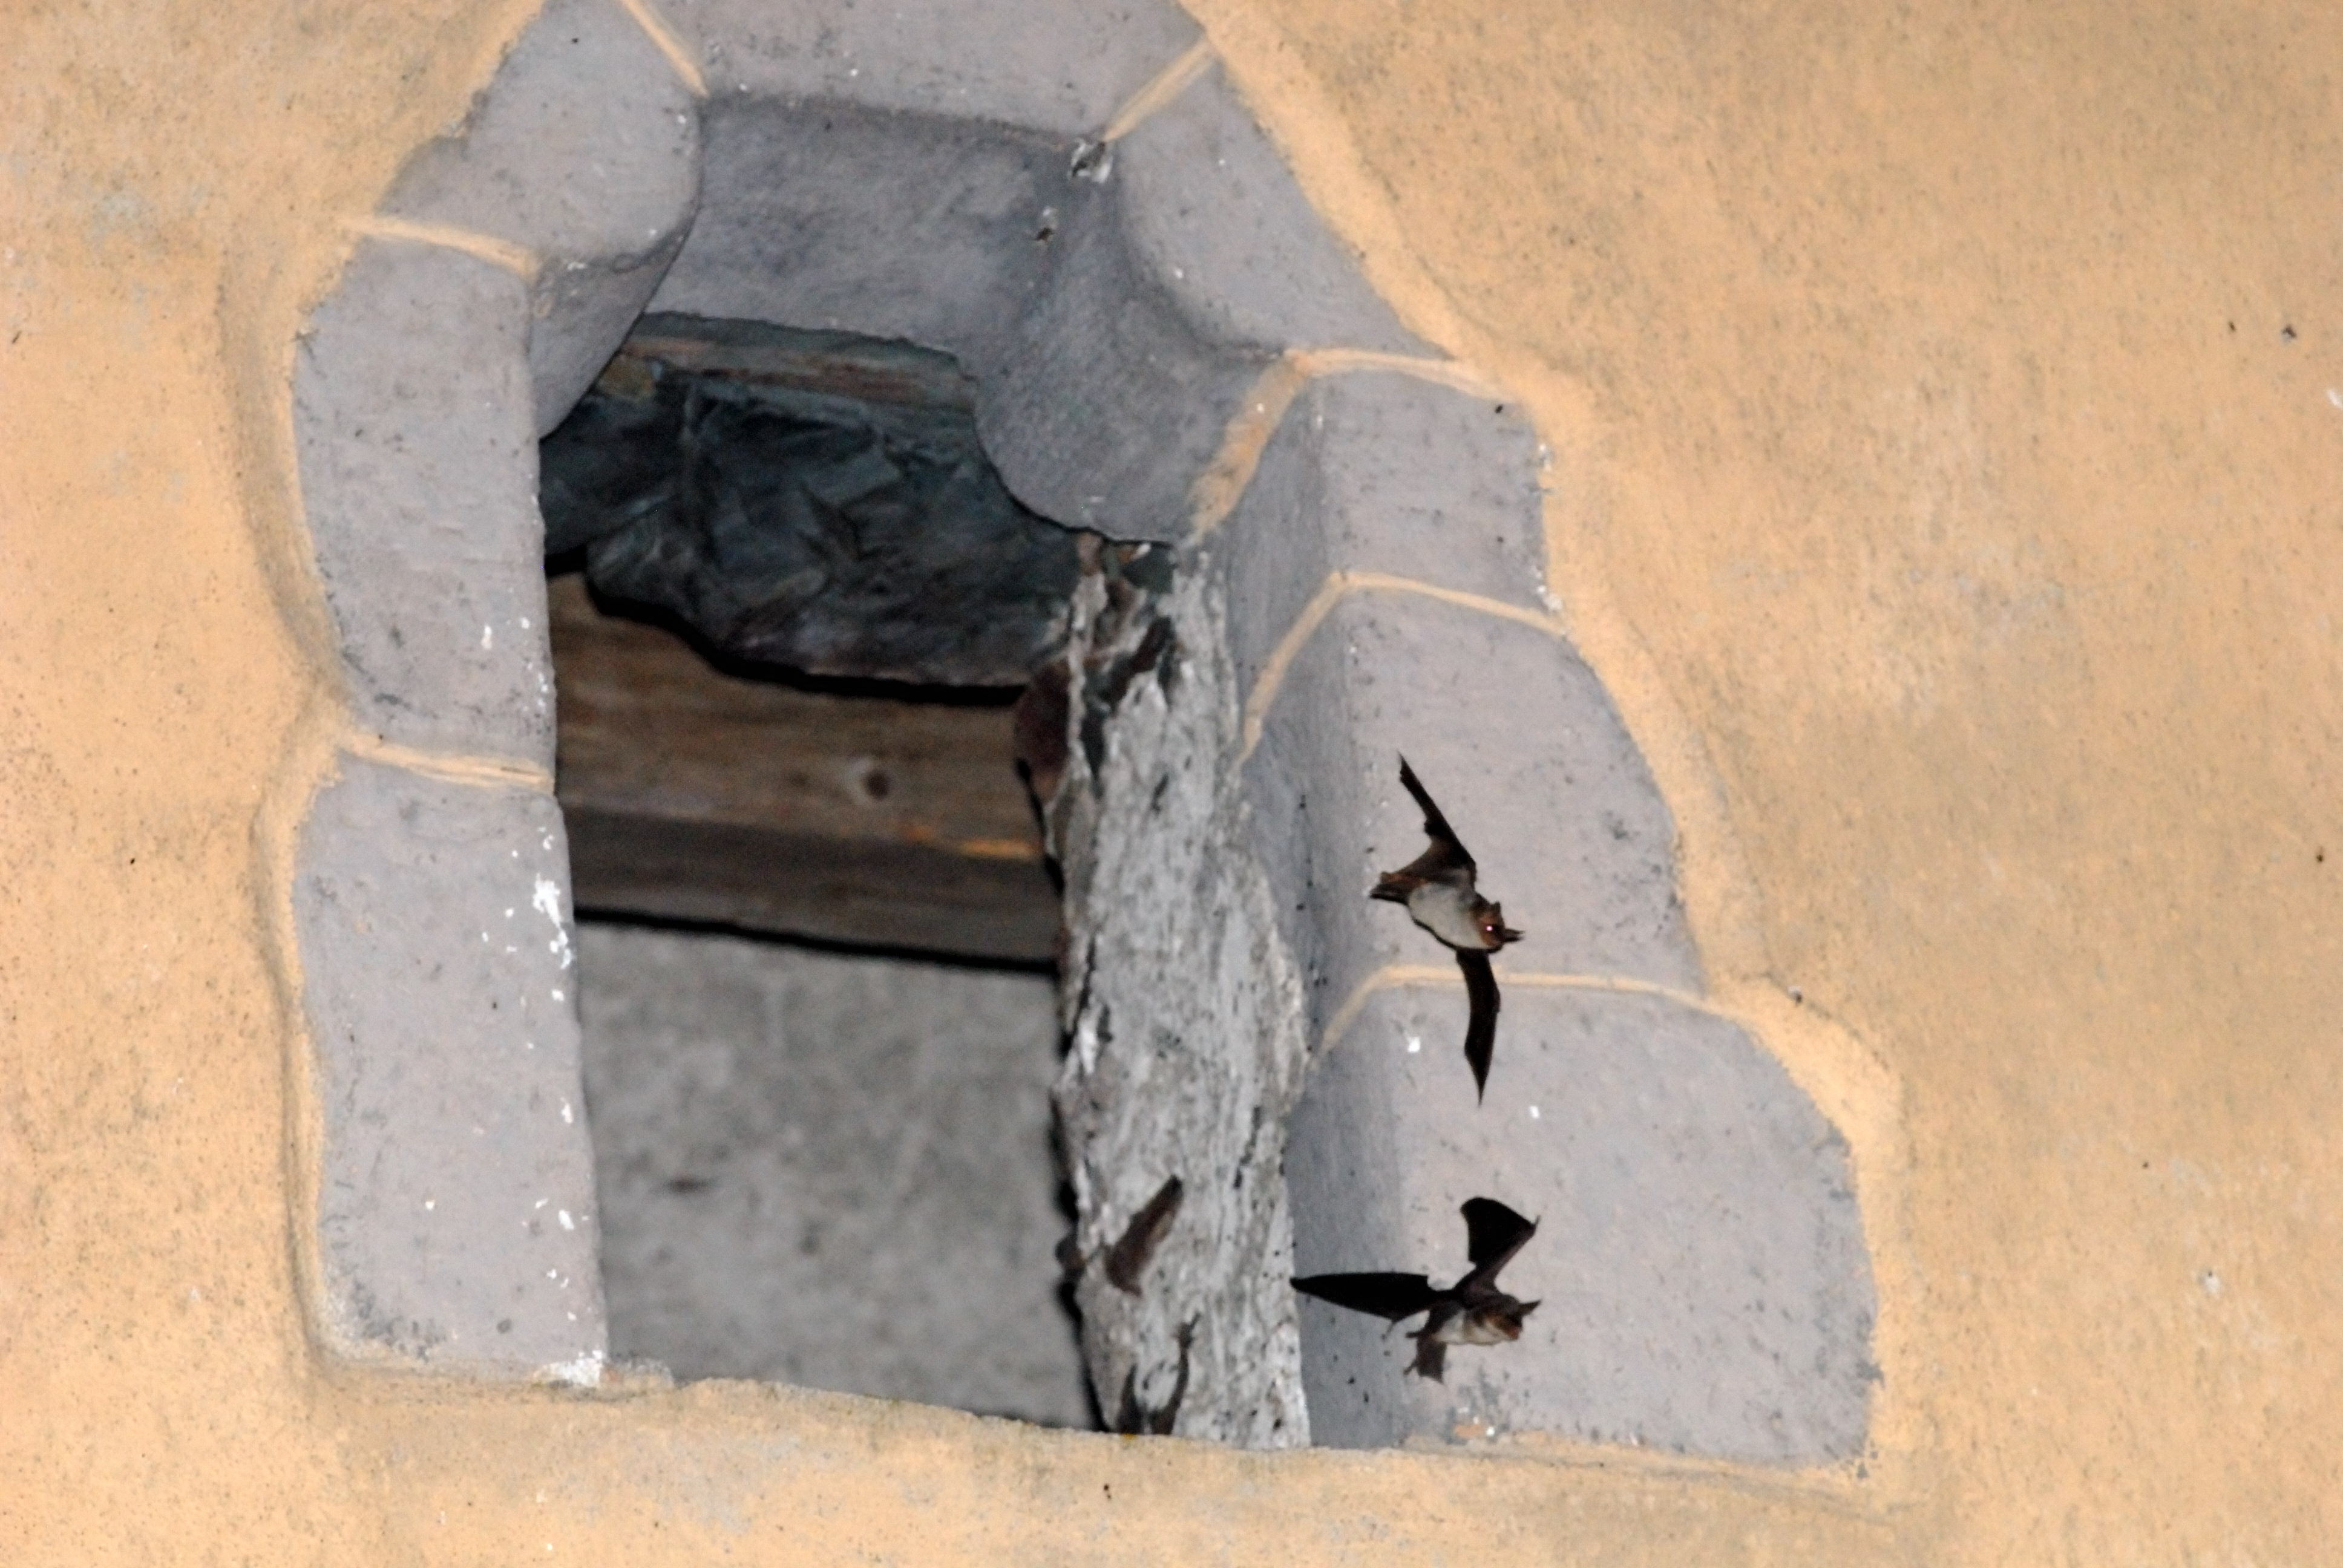 bats use any opening into a building, including chimneys. In this image they are flying through an opening in a church